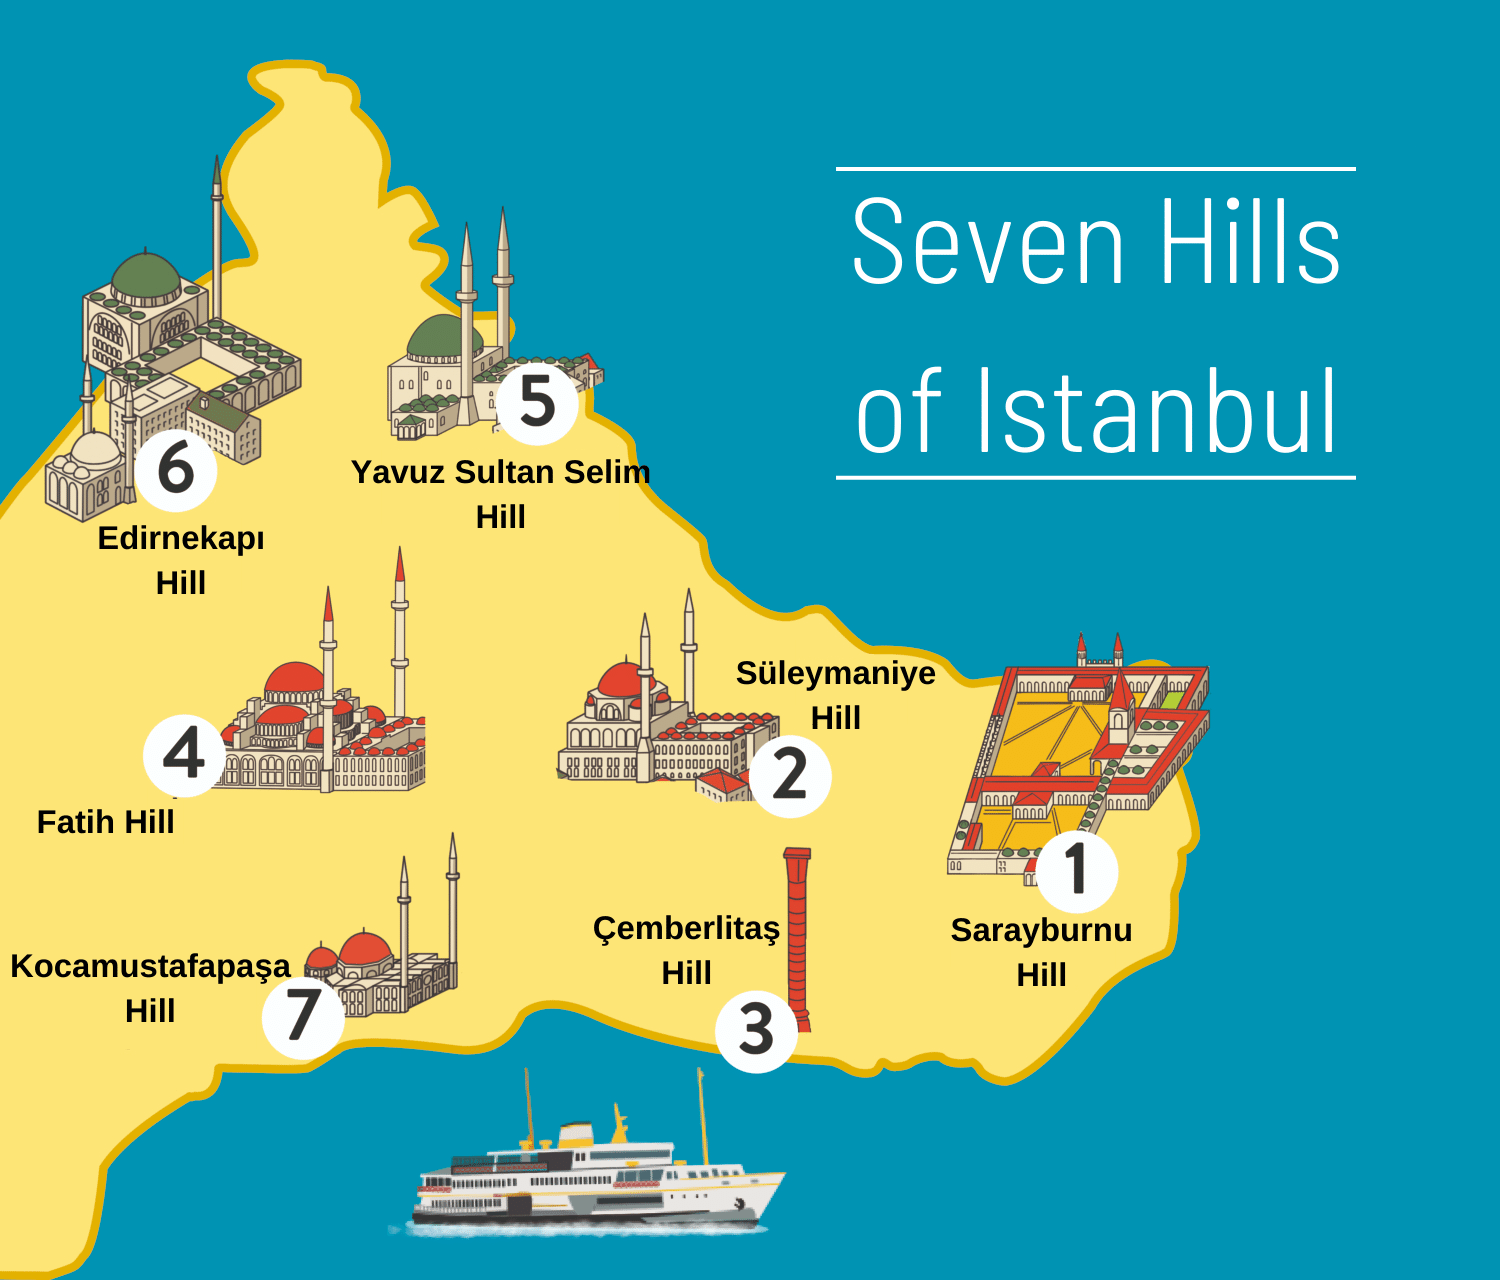 Seven Hills of Istanbul